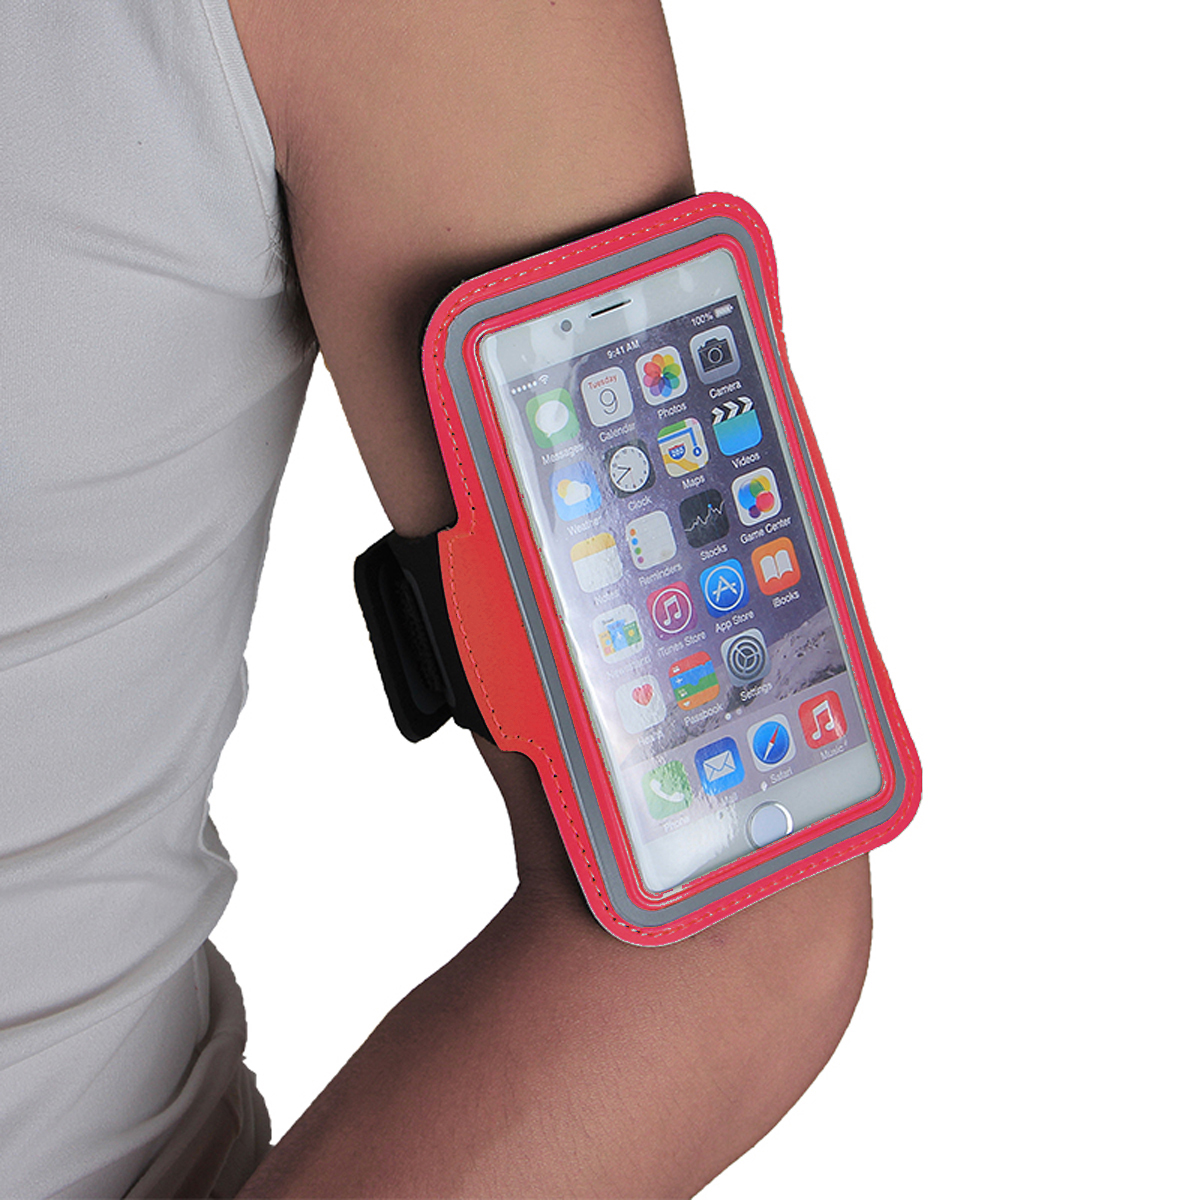 Universal-Sports-Elastic-Armband-Sweatproof-Touch-Screen-Mobile-Phone-Arm-Bags-with-Earphone-Port-fo-1890485-10